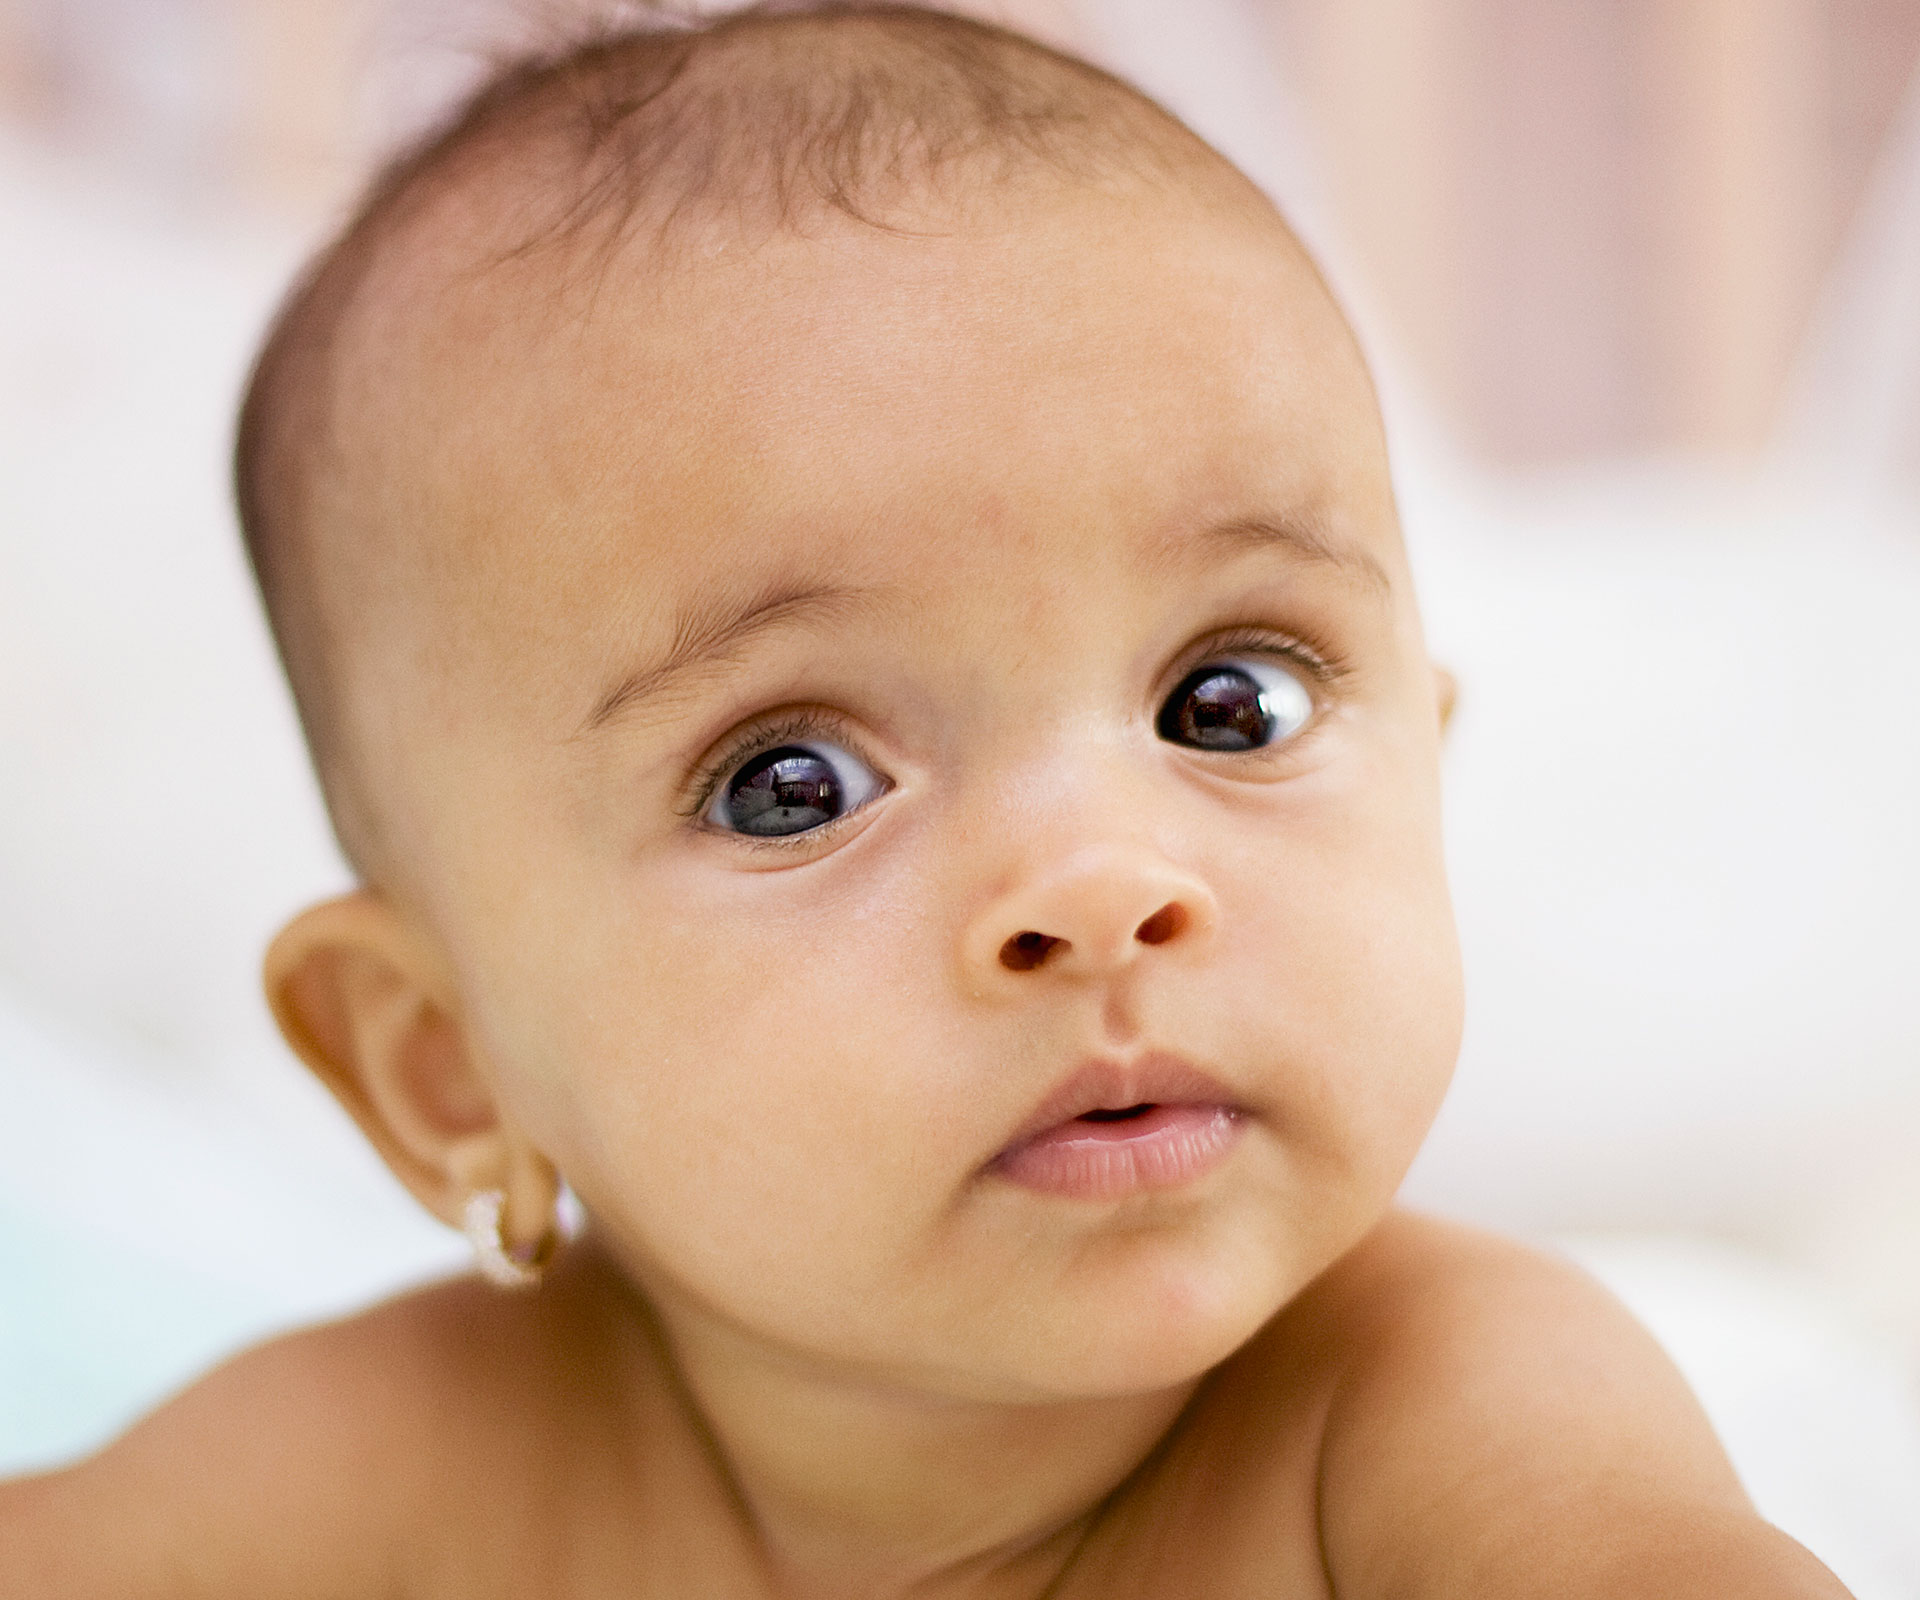 Call for ban on ‘cruel’ baby ear piercing